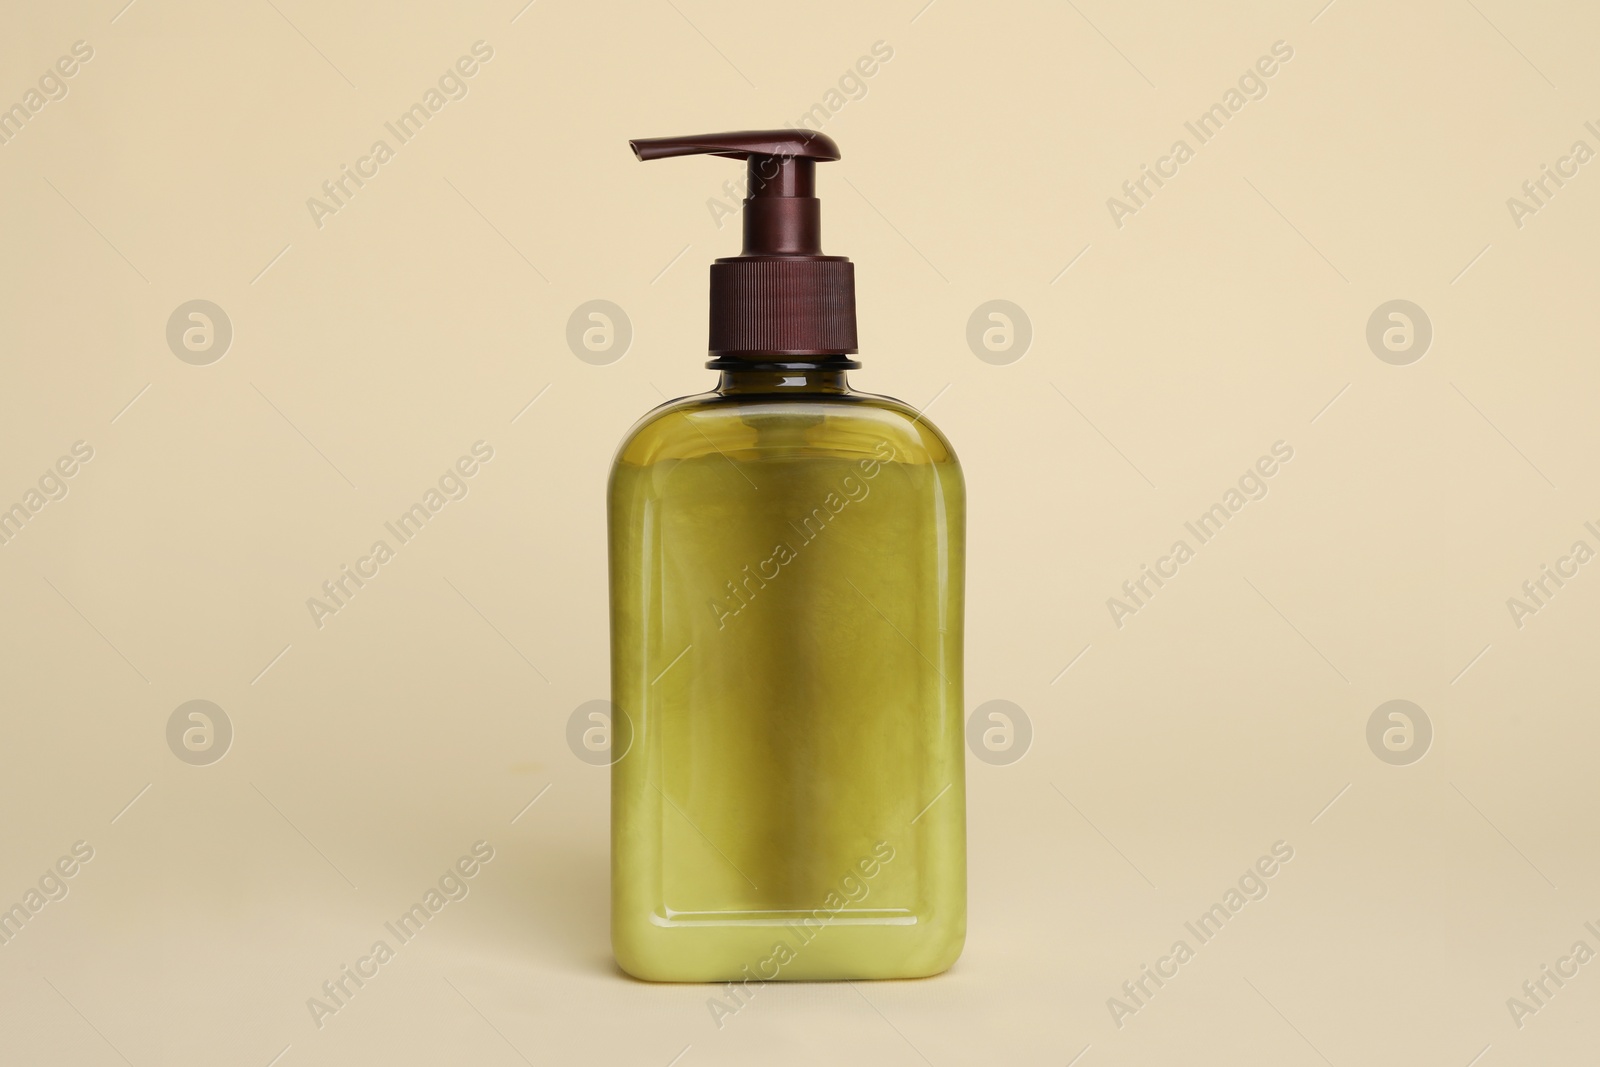 Photo of Bottle of face cleansing product on beige background. Space for text